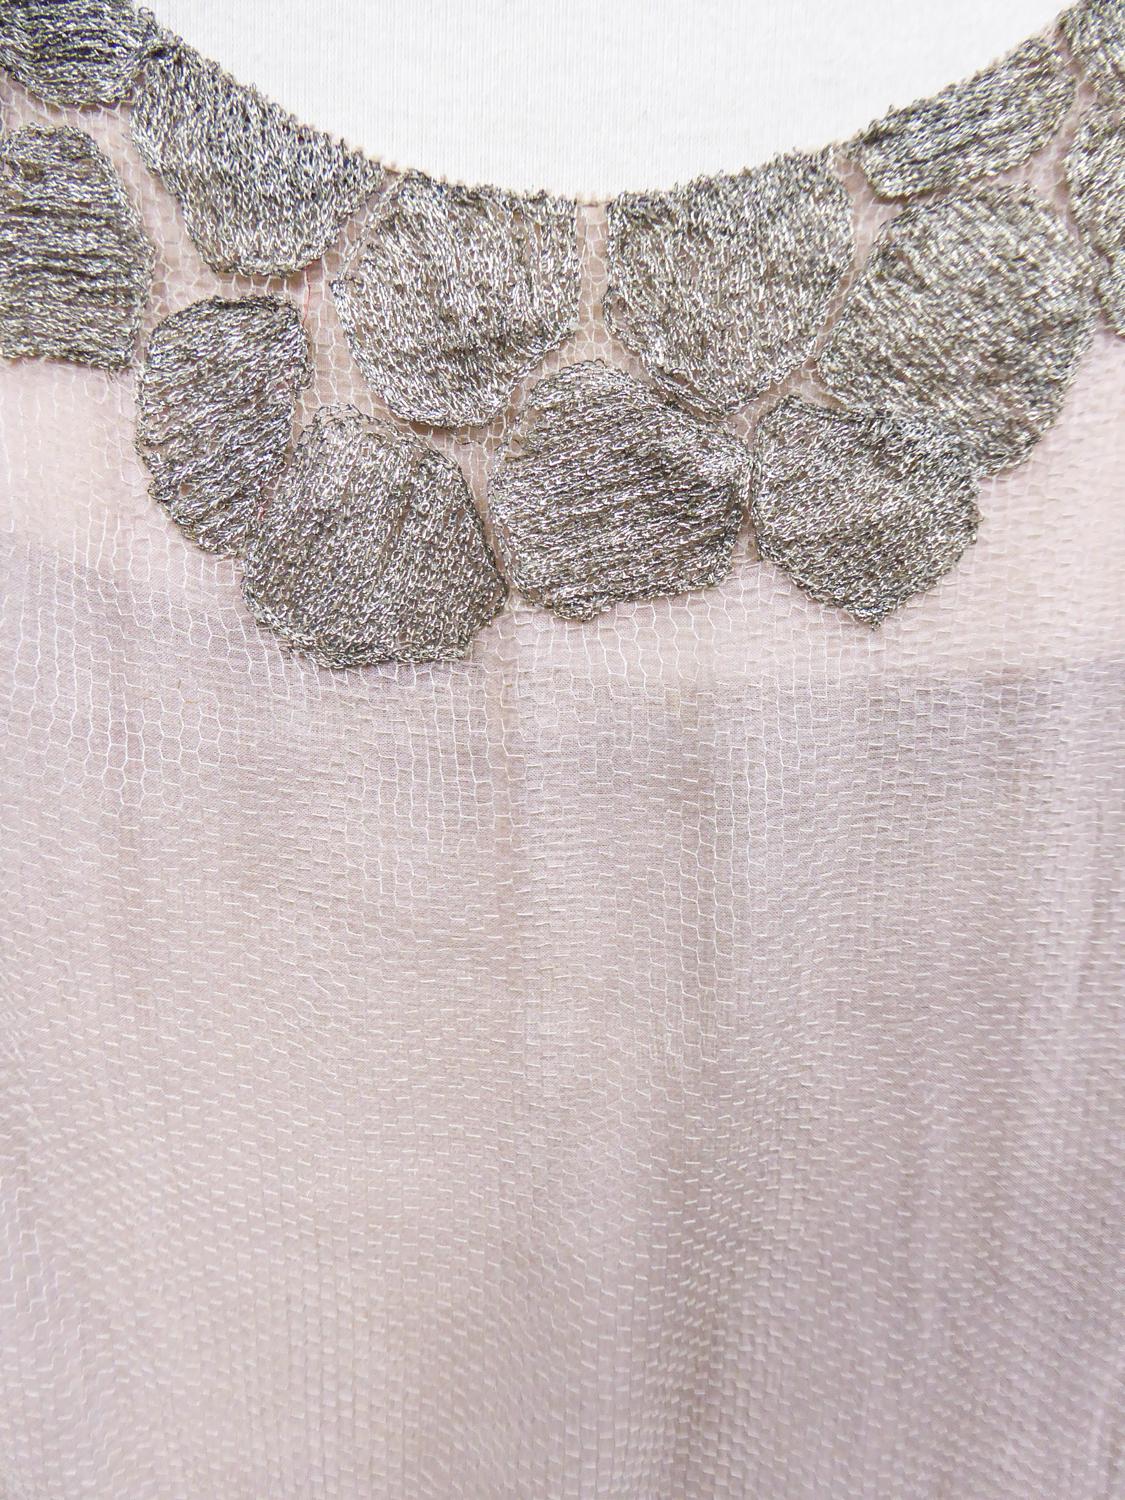 French Couture Art Deco Flapper Dress Net and Voile Embroidered Circa 1920/1925 For Sale 4